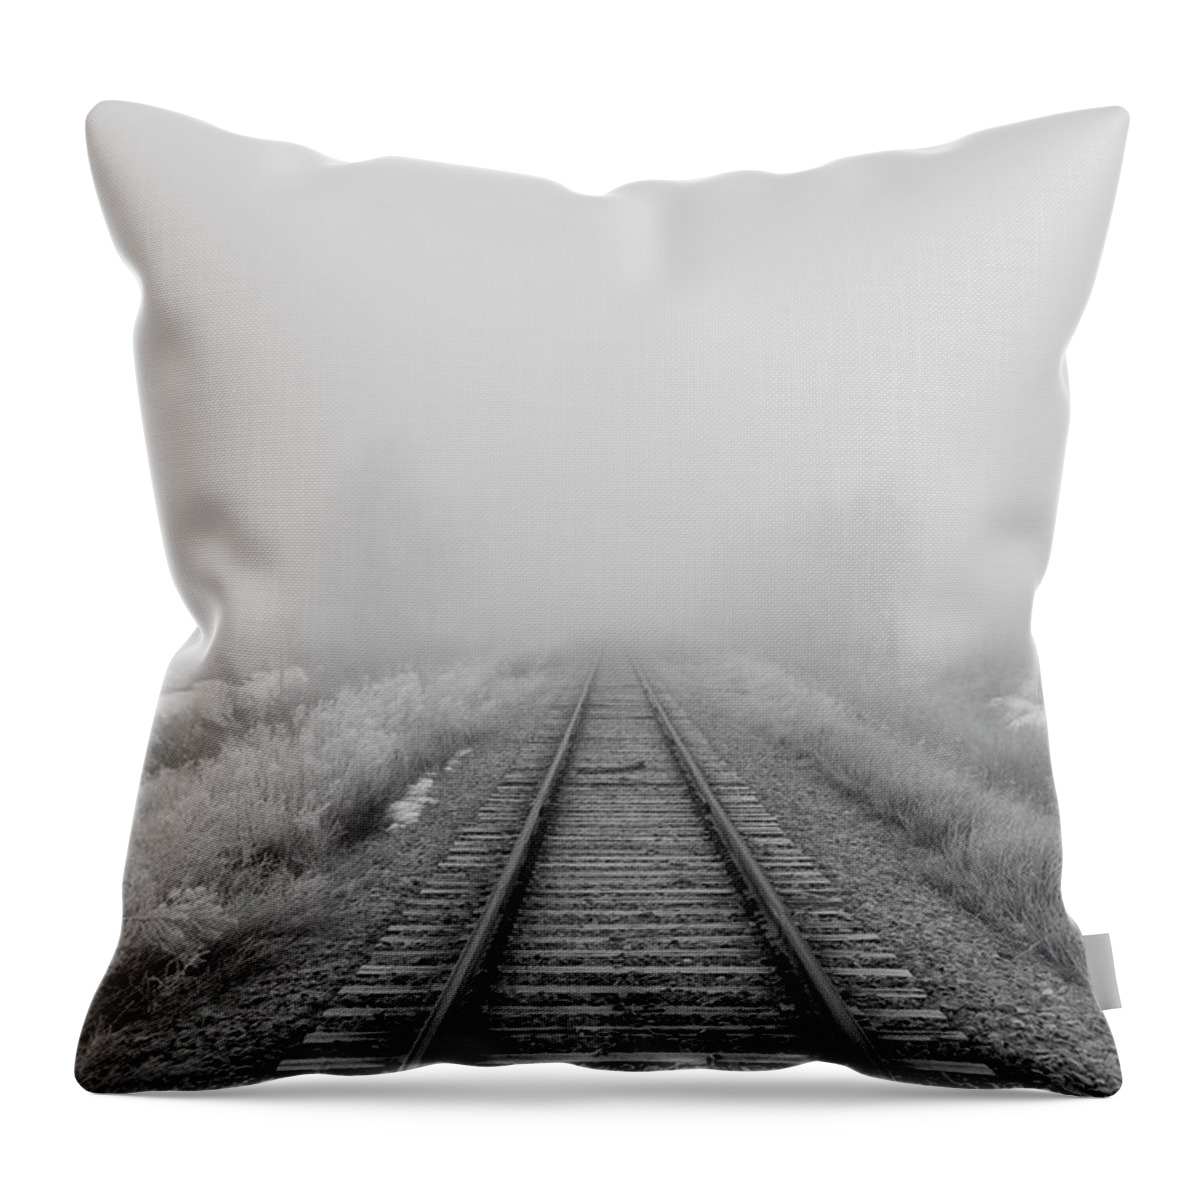 Tranquility Throw Pillow featuring the photograph Tracks by Jim Bushelle